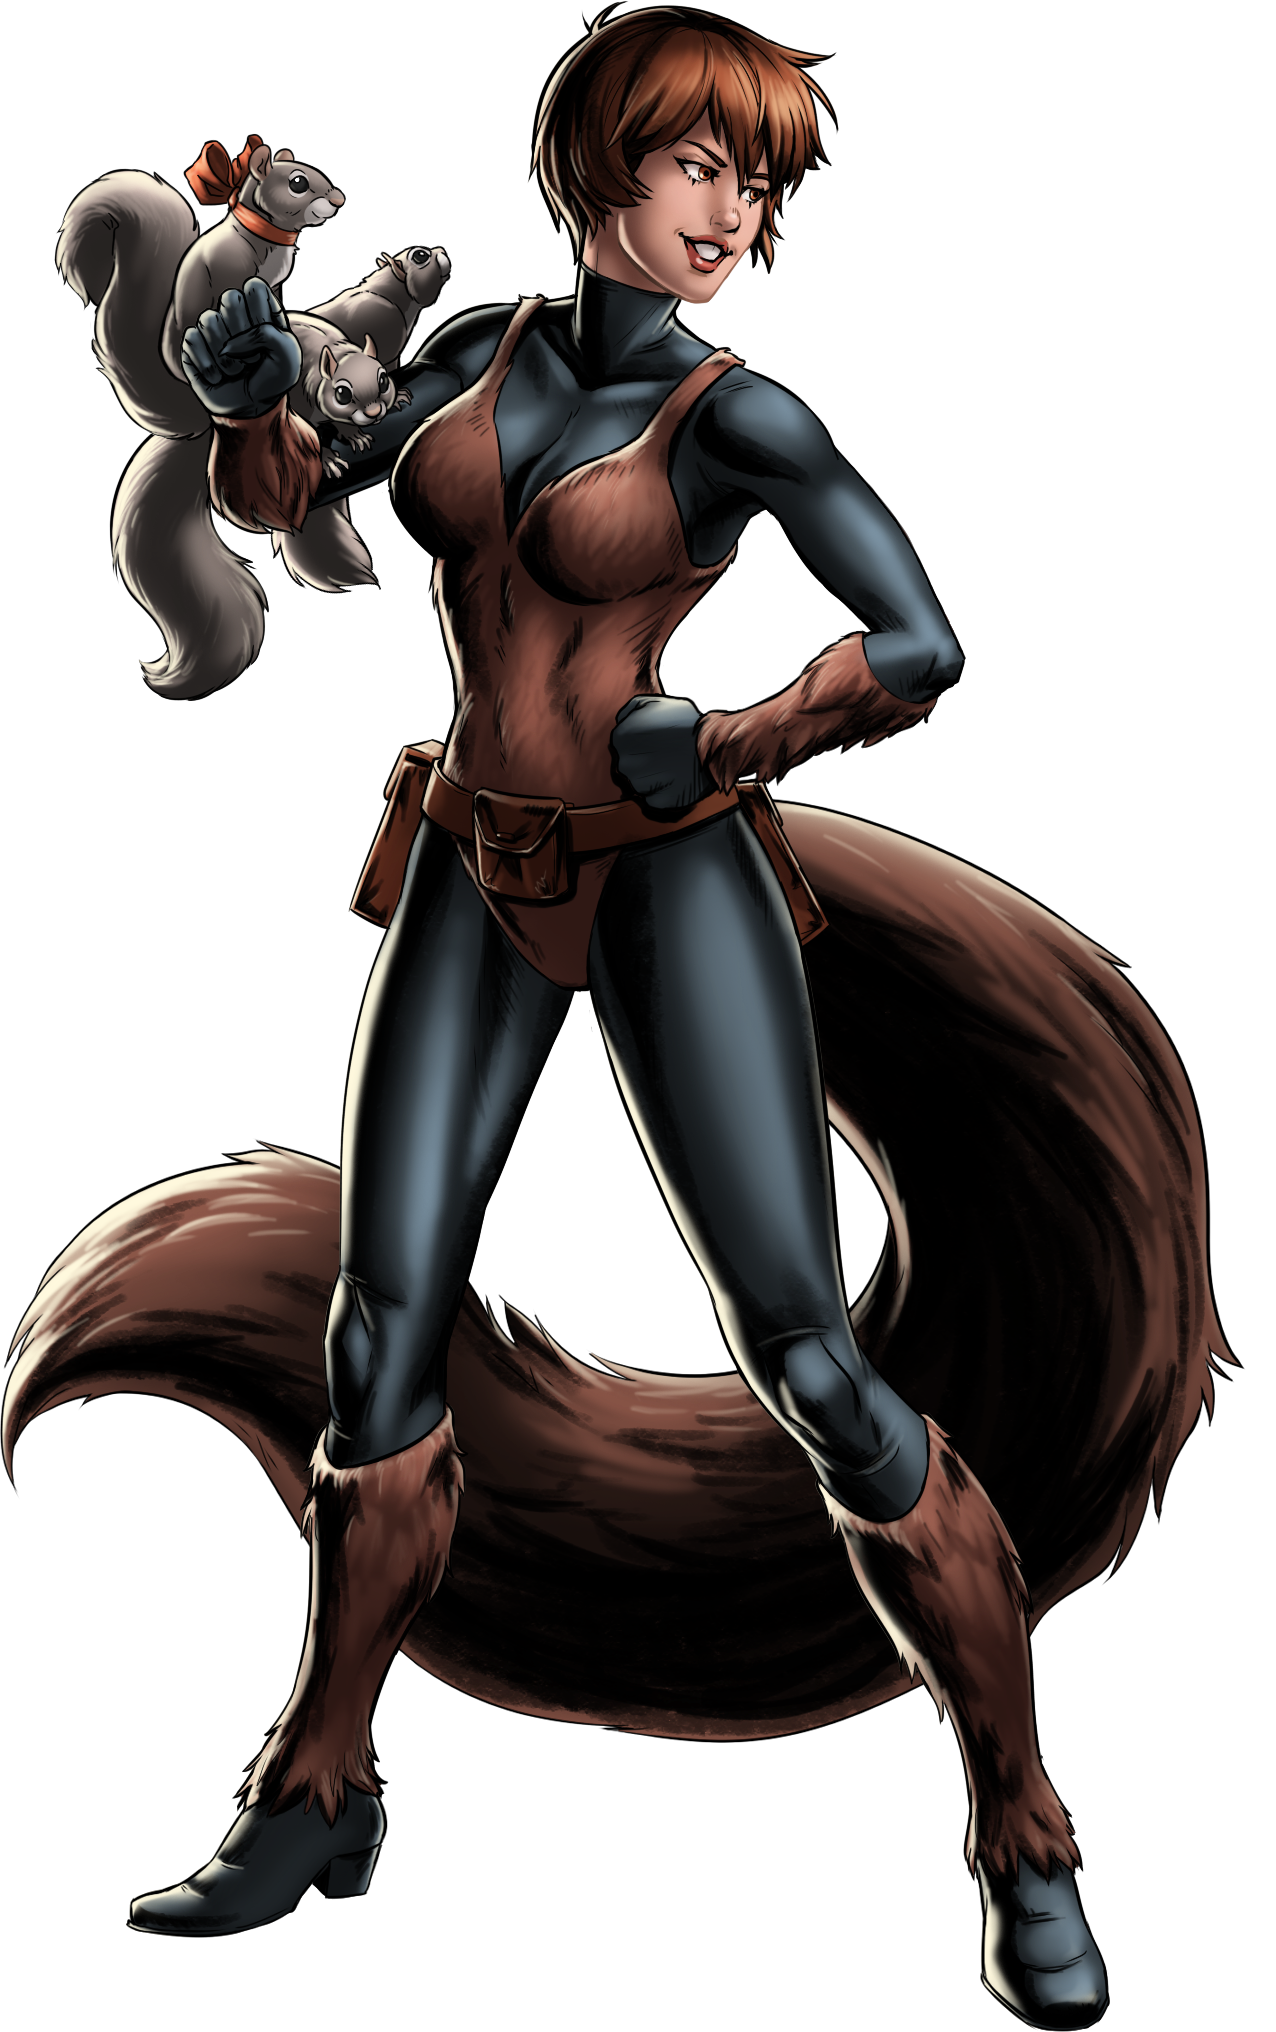 Images of Squirrel Girl | 1276x2032